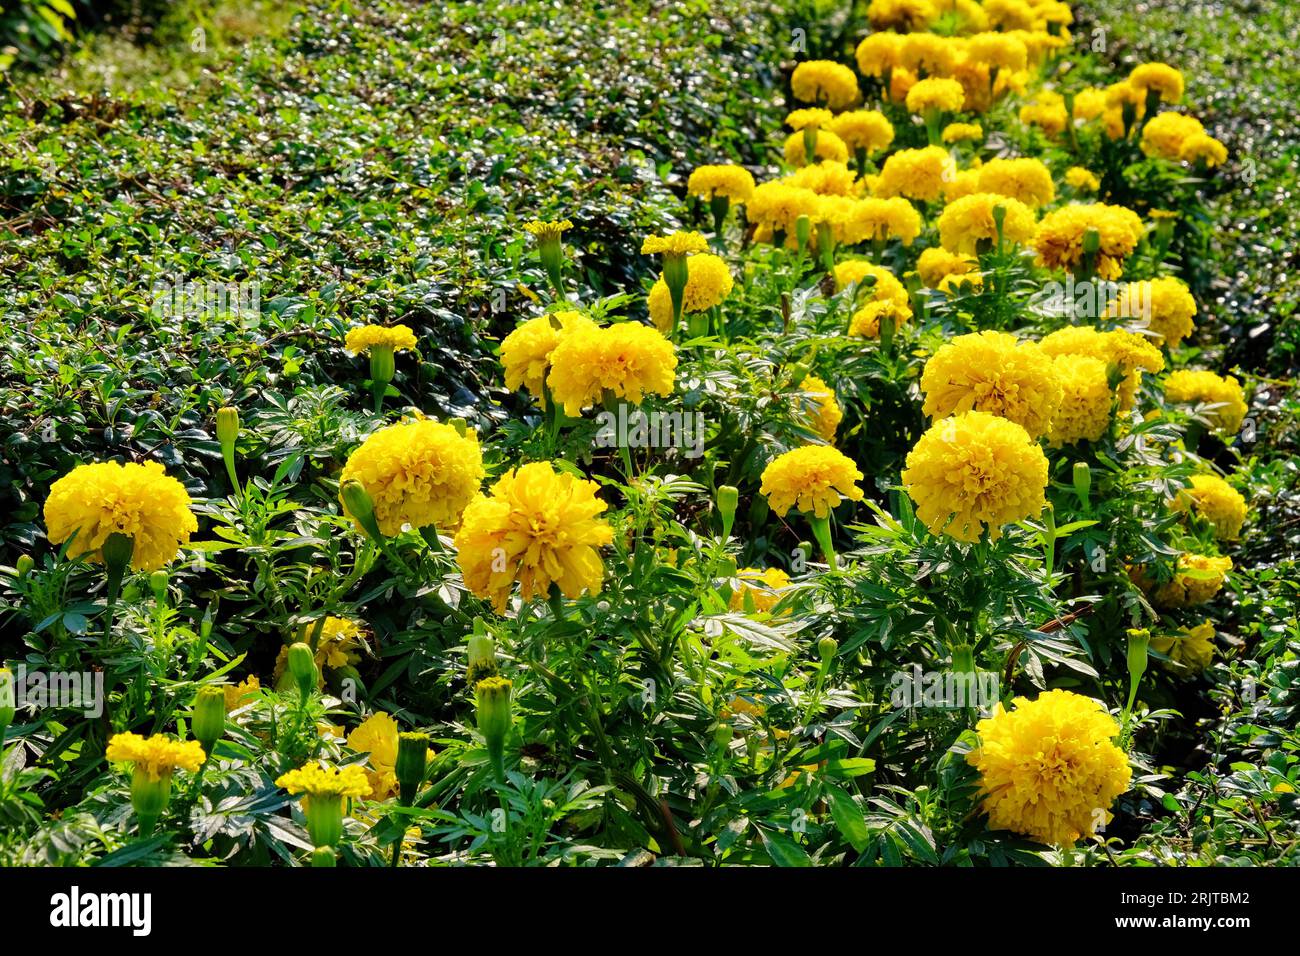 A flower bed with many yellow marigolds flowers, close-up. Stock Photo